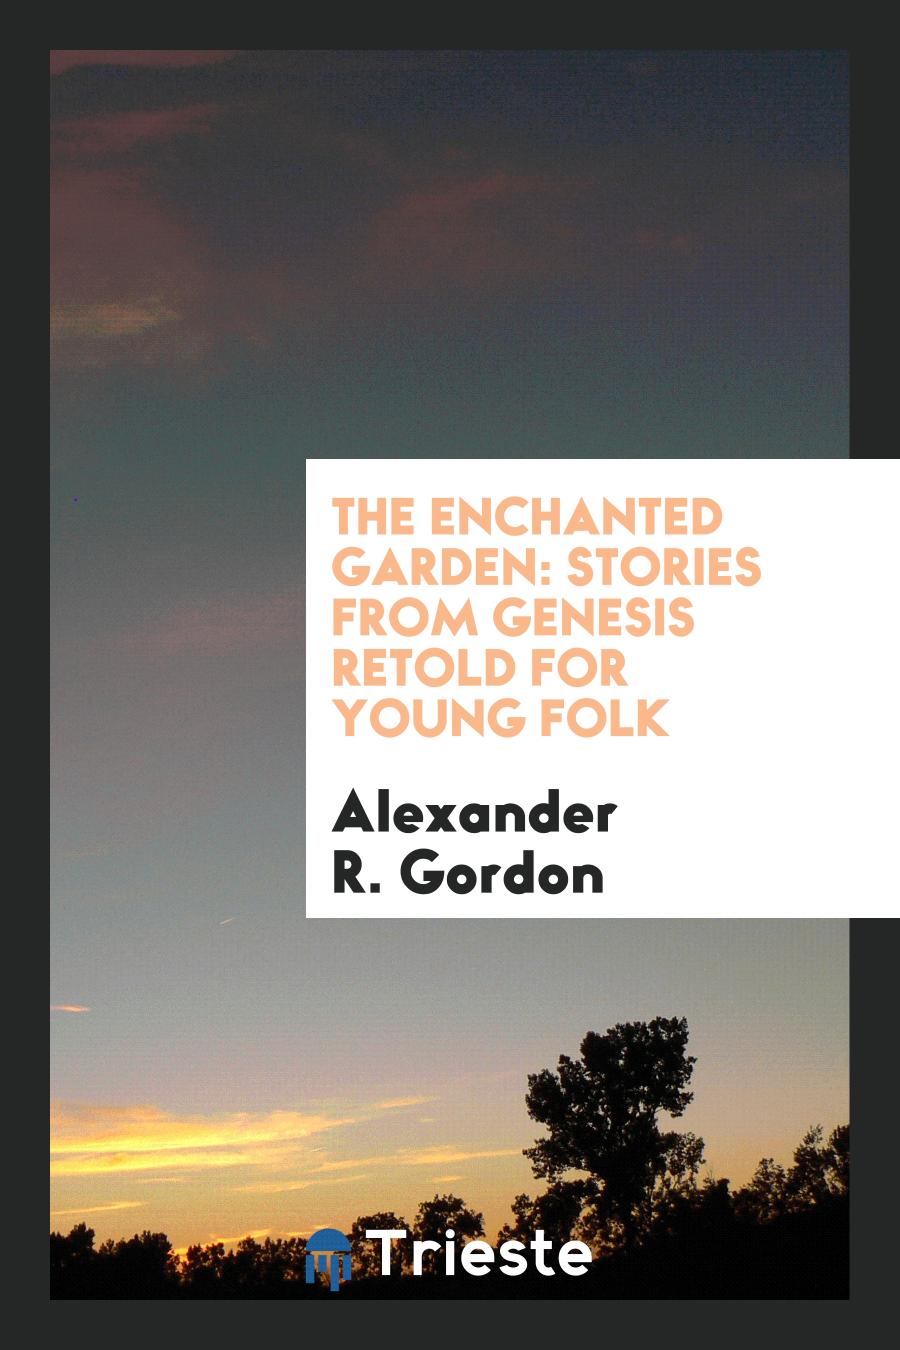 The Enchanted Garden: Stories from Genesis Retold for Young Folk